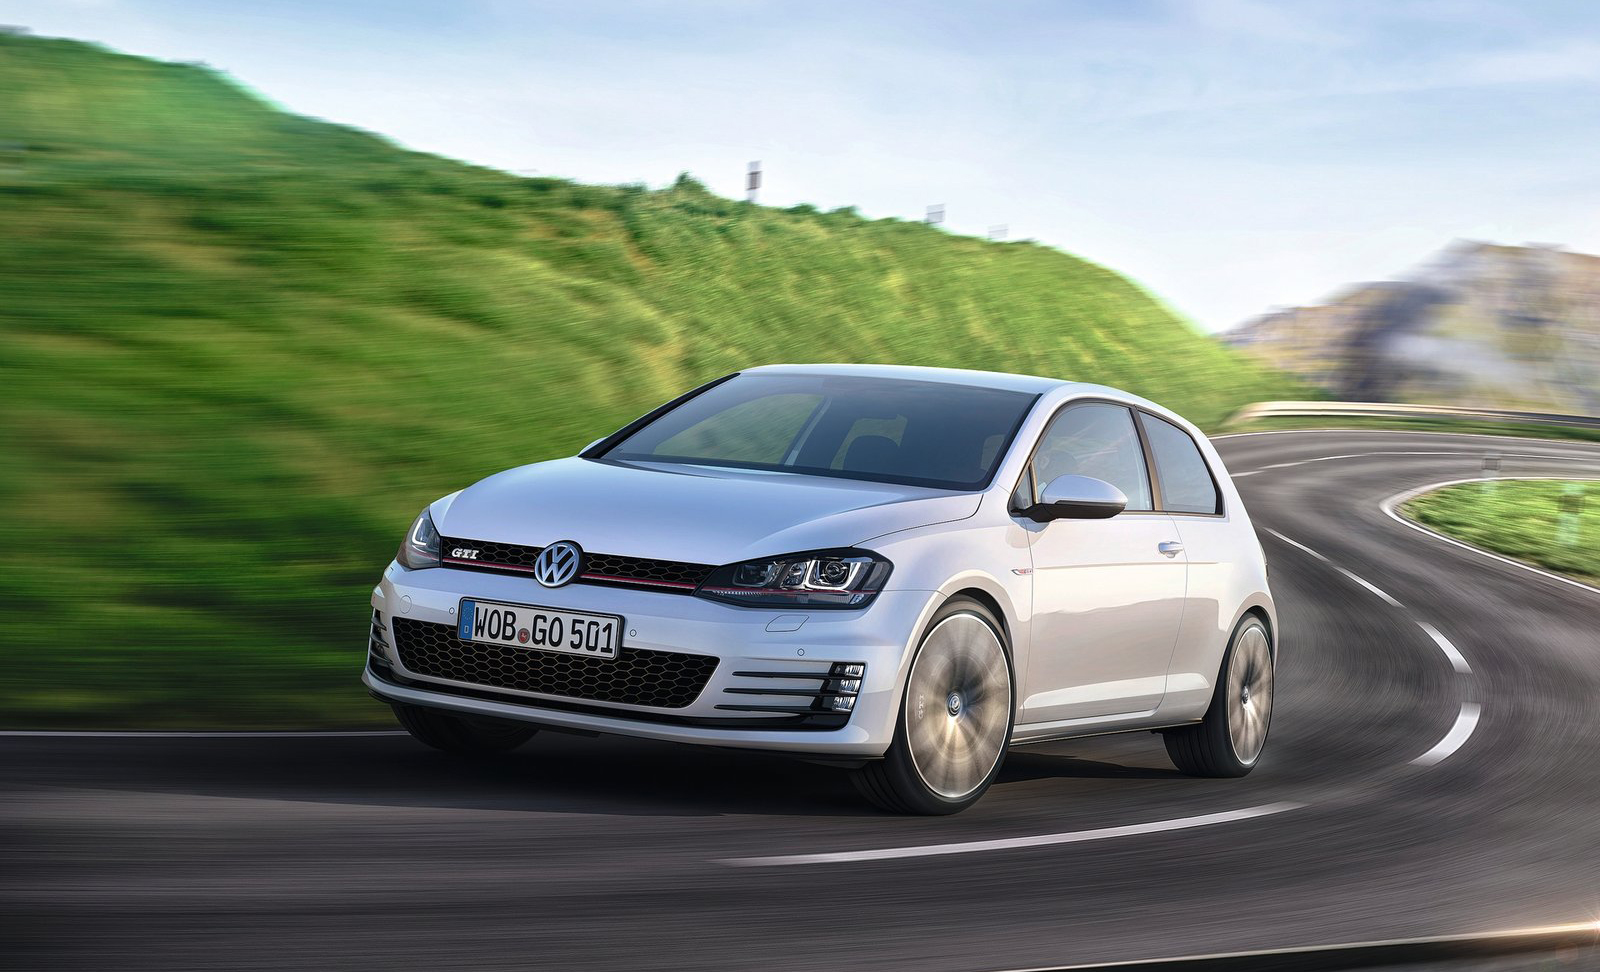 The new Volkswagen Golf 7 GTI has been revealed ahead of its Geneva Motor Show unveiling